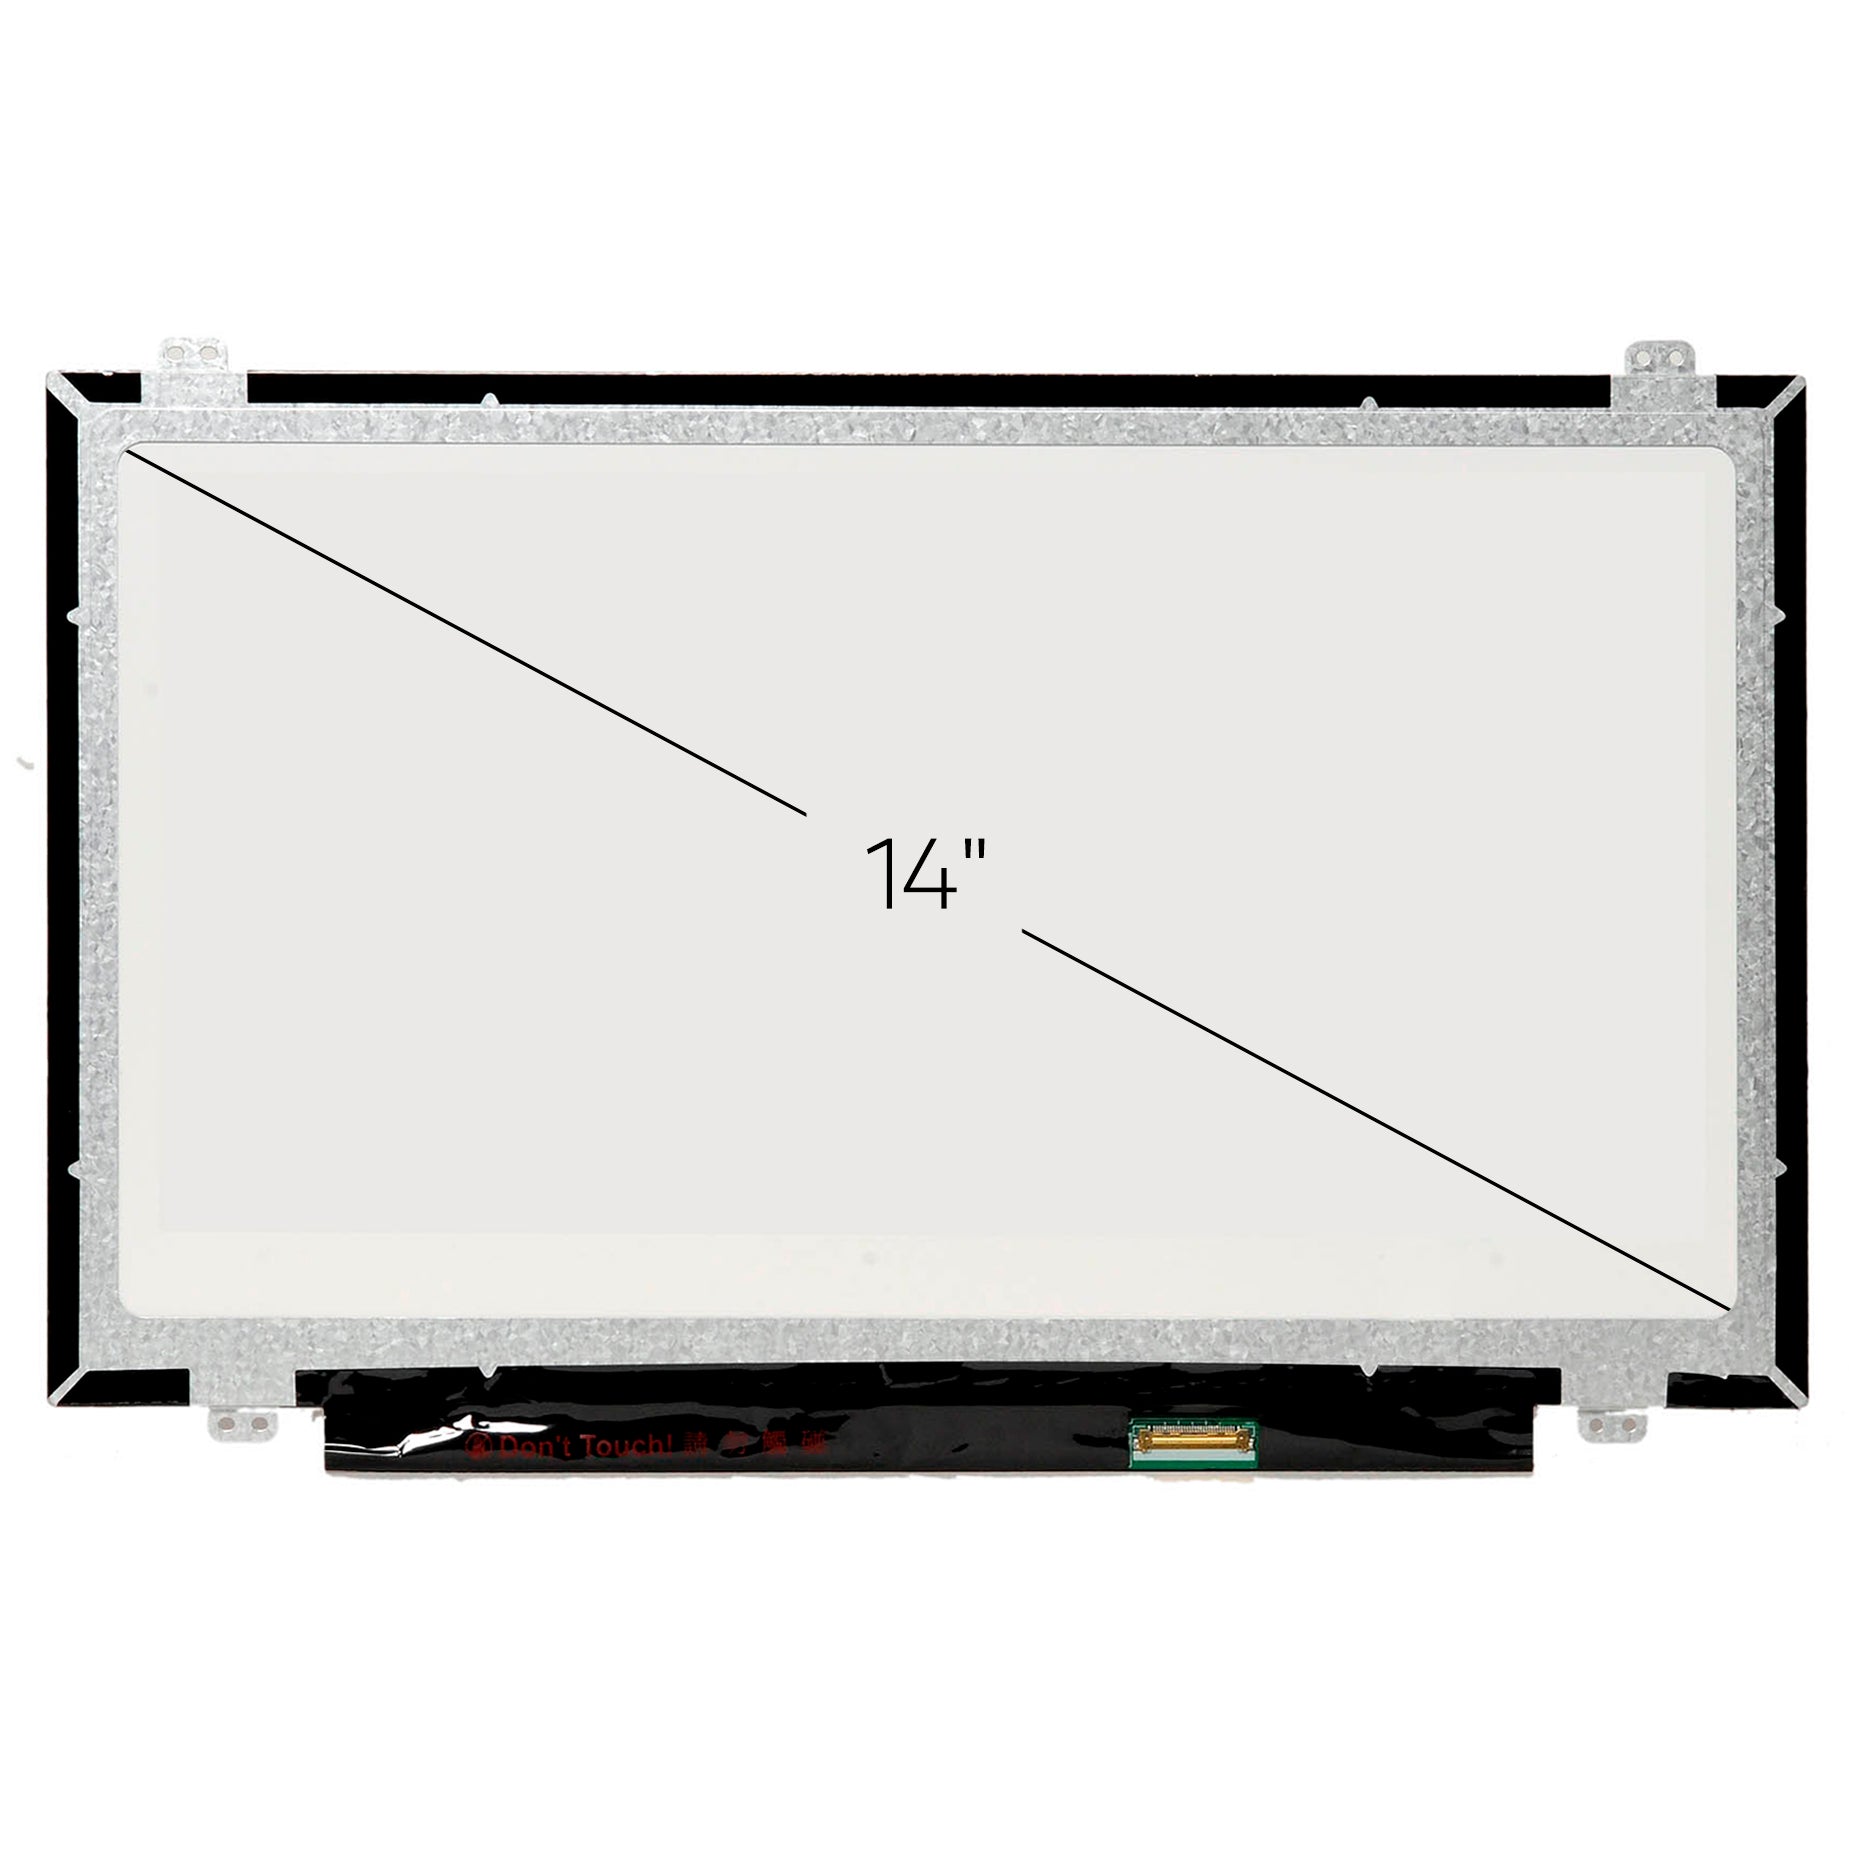 Screen Replacement for Dell Latitude E7440 P40G001 HD 1366x768 Glossy LCD LED Display